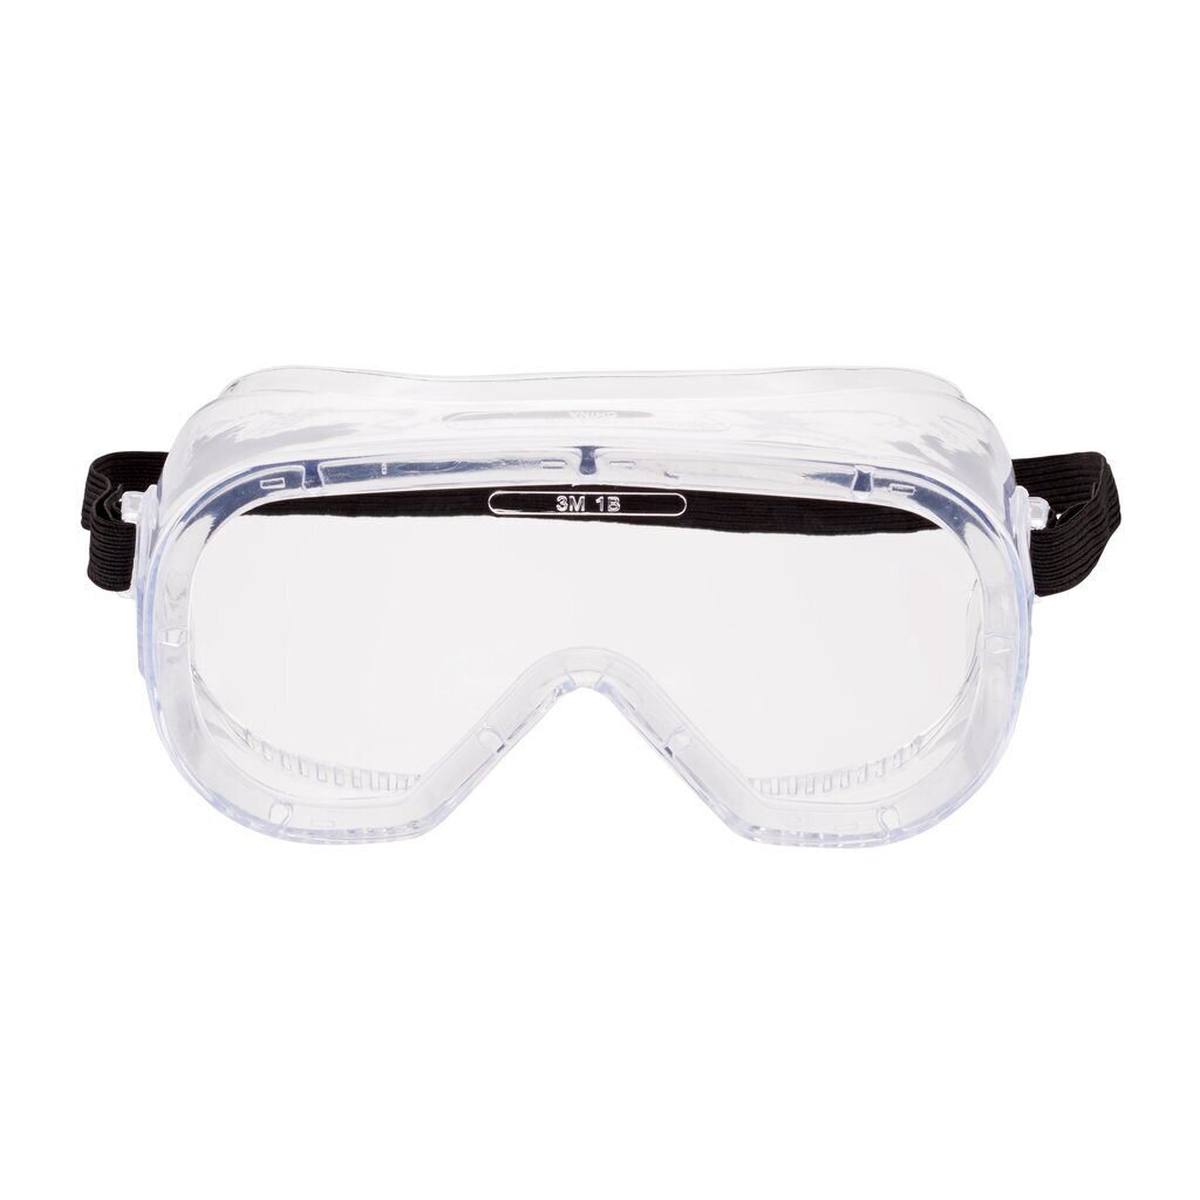 3M 4800C Full vision safety spectacles